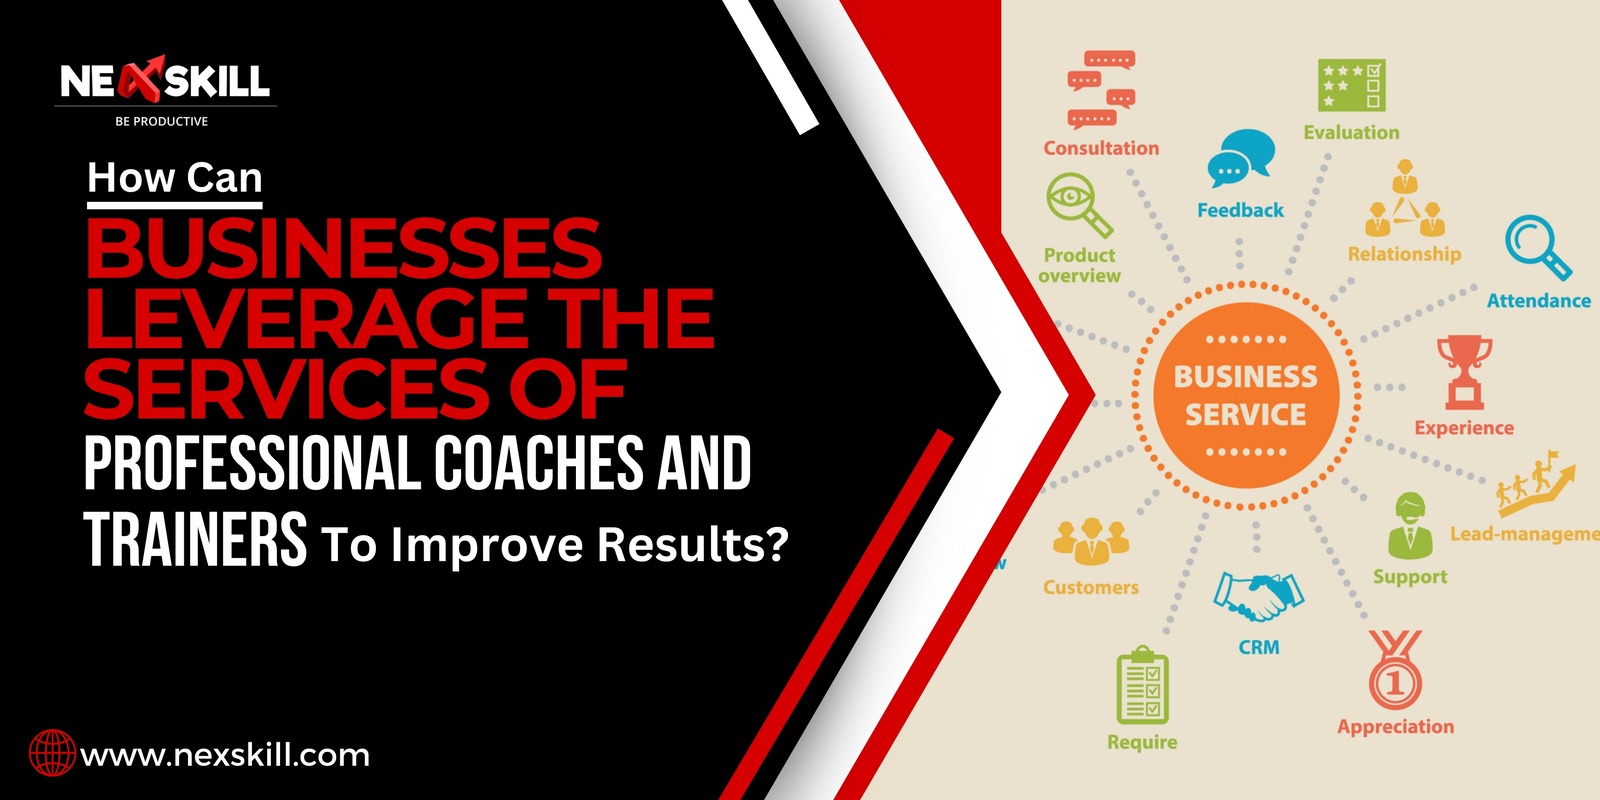 How can Businesses Leverage the Services of Professional Coaches and Trainers to Improve Results?